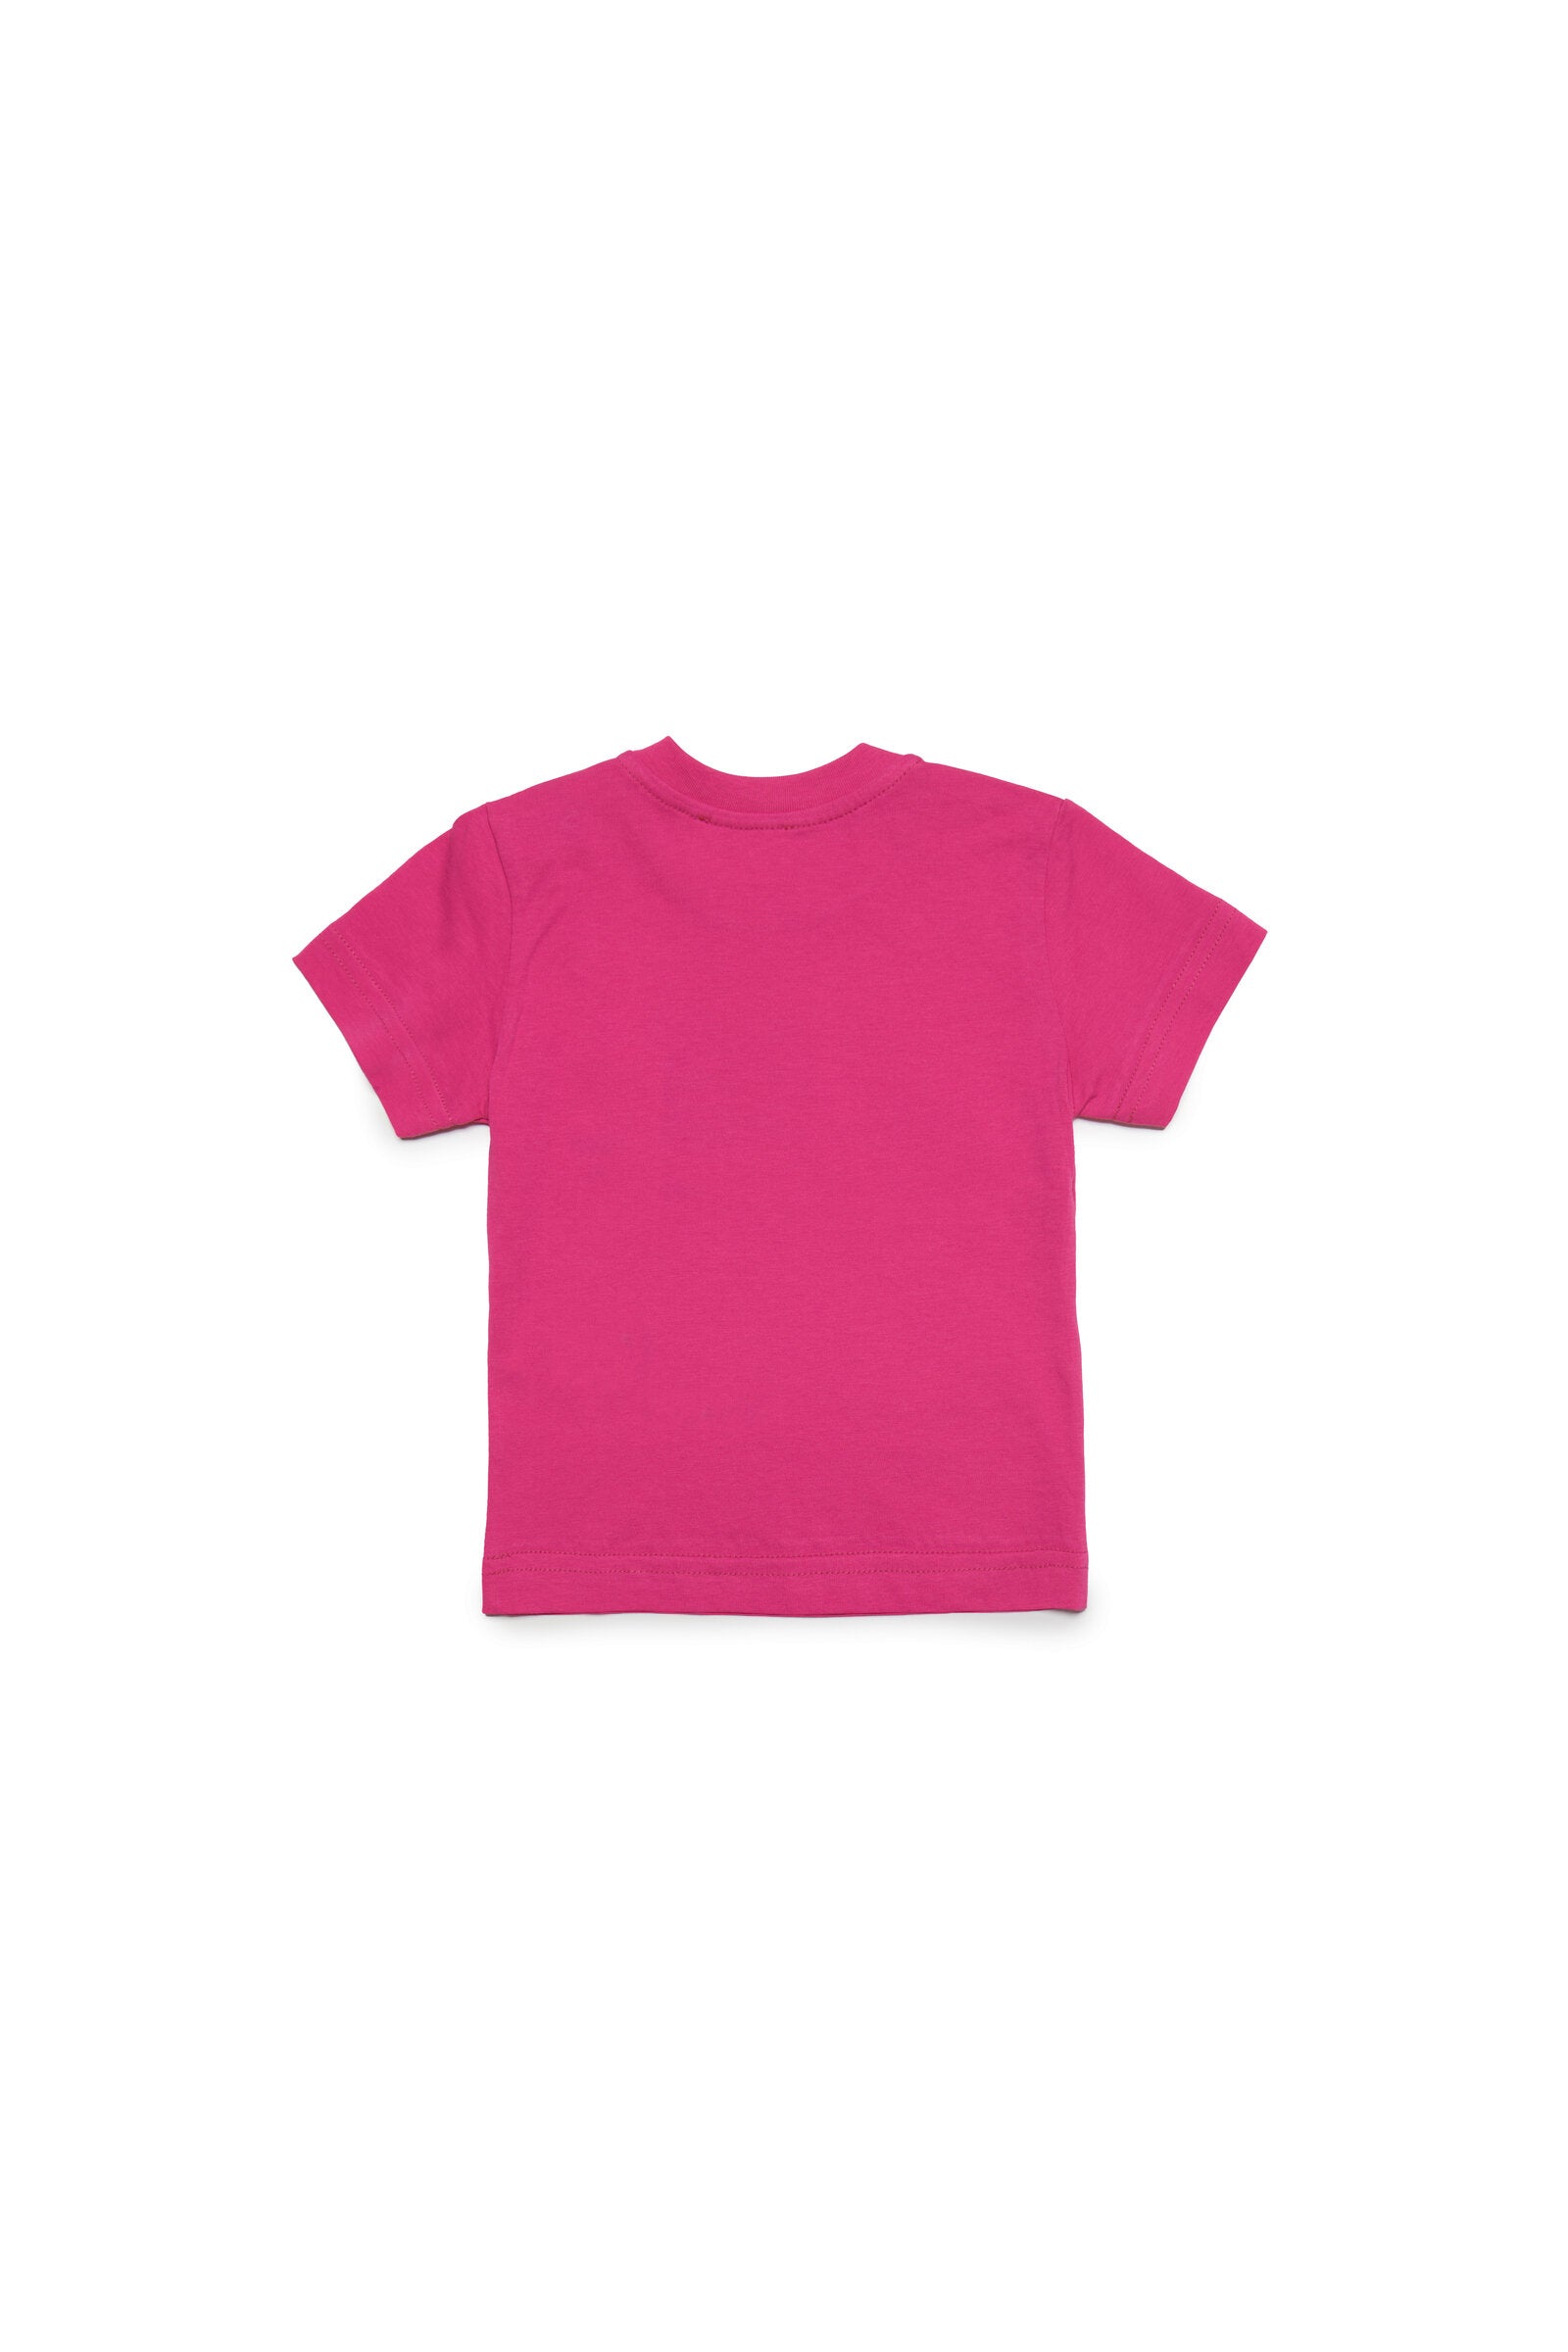 Fuchsia t-shirt with Diesel double logo and snap button closure